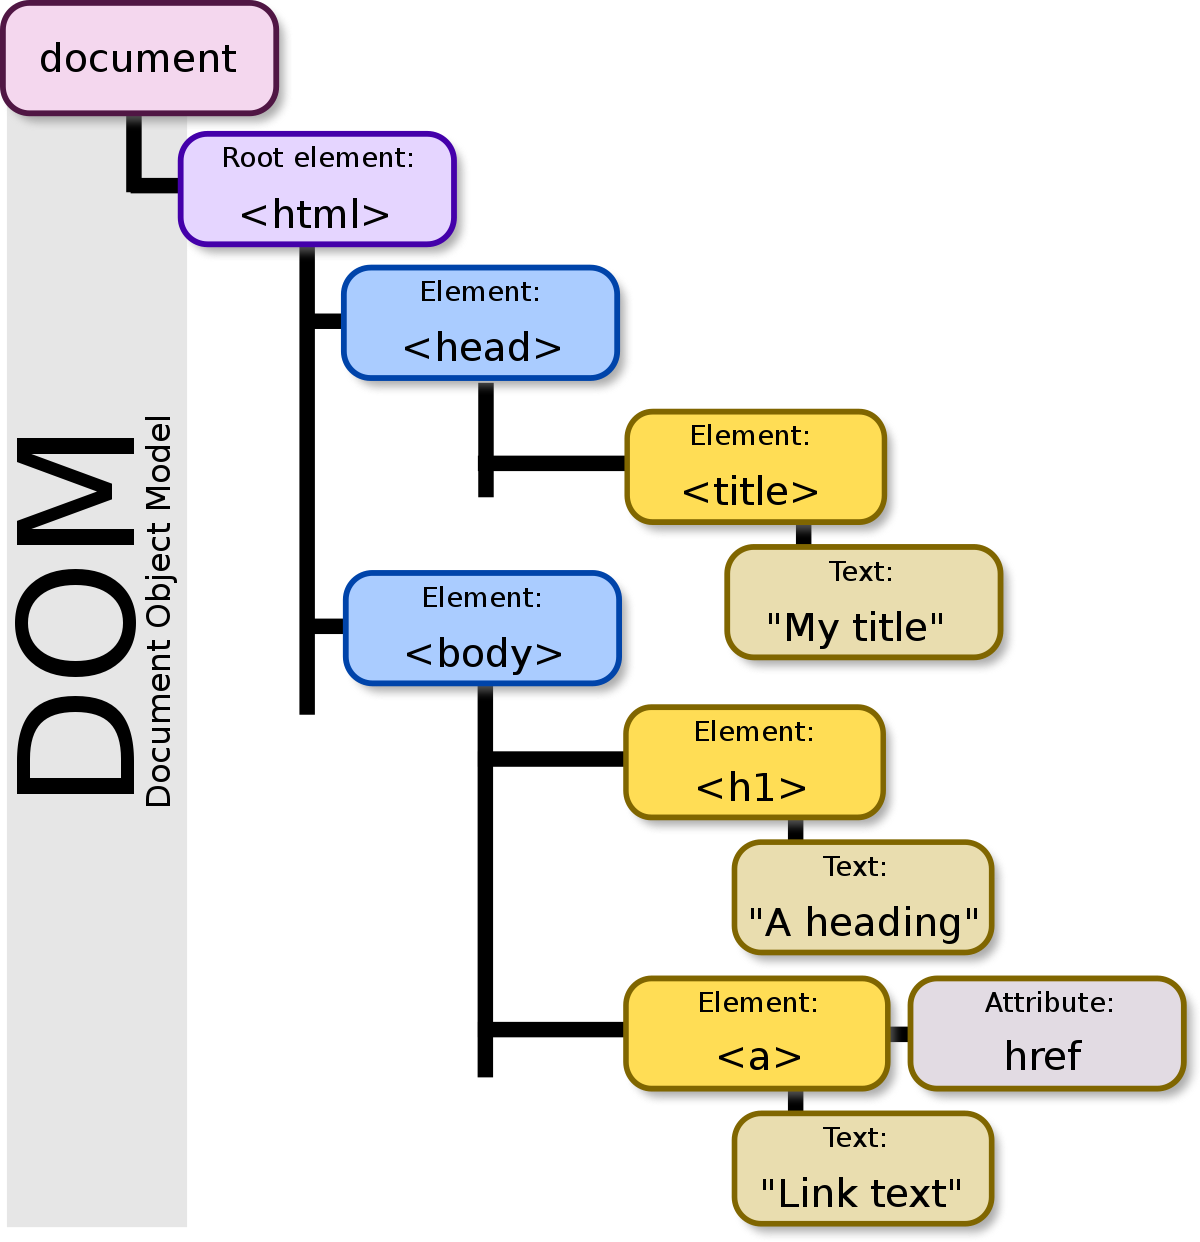 structure of the DOM tree